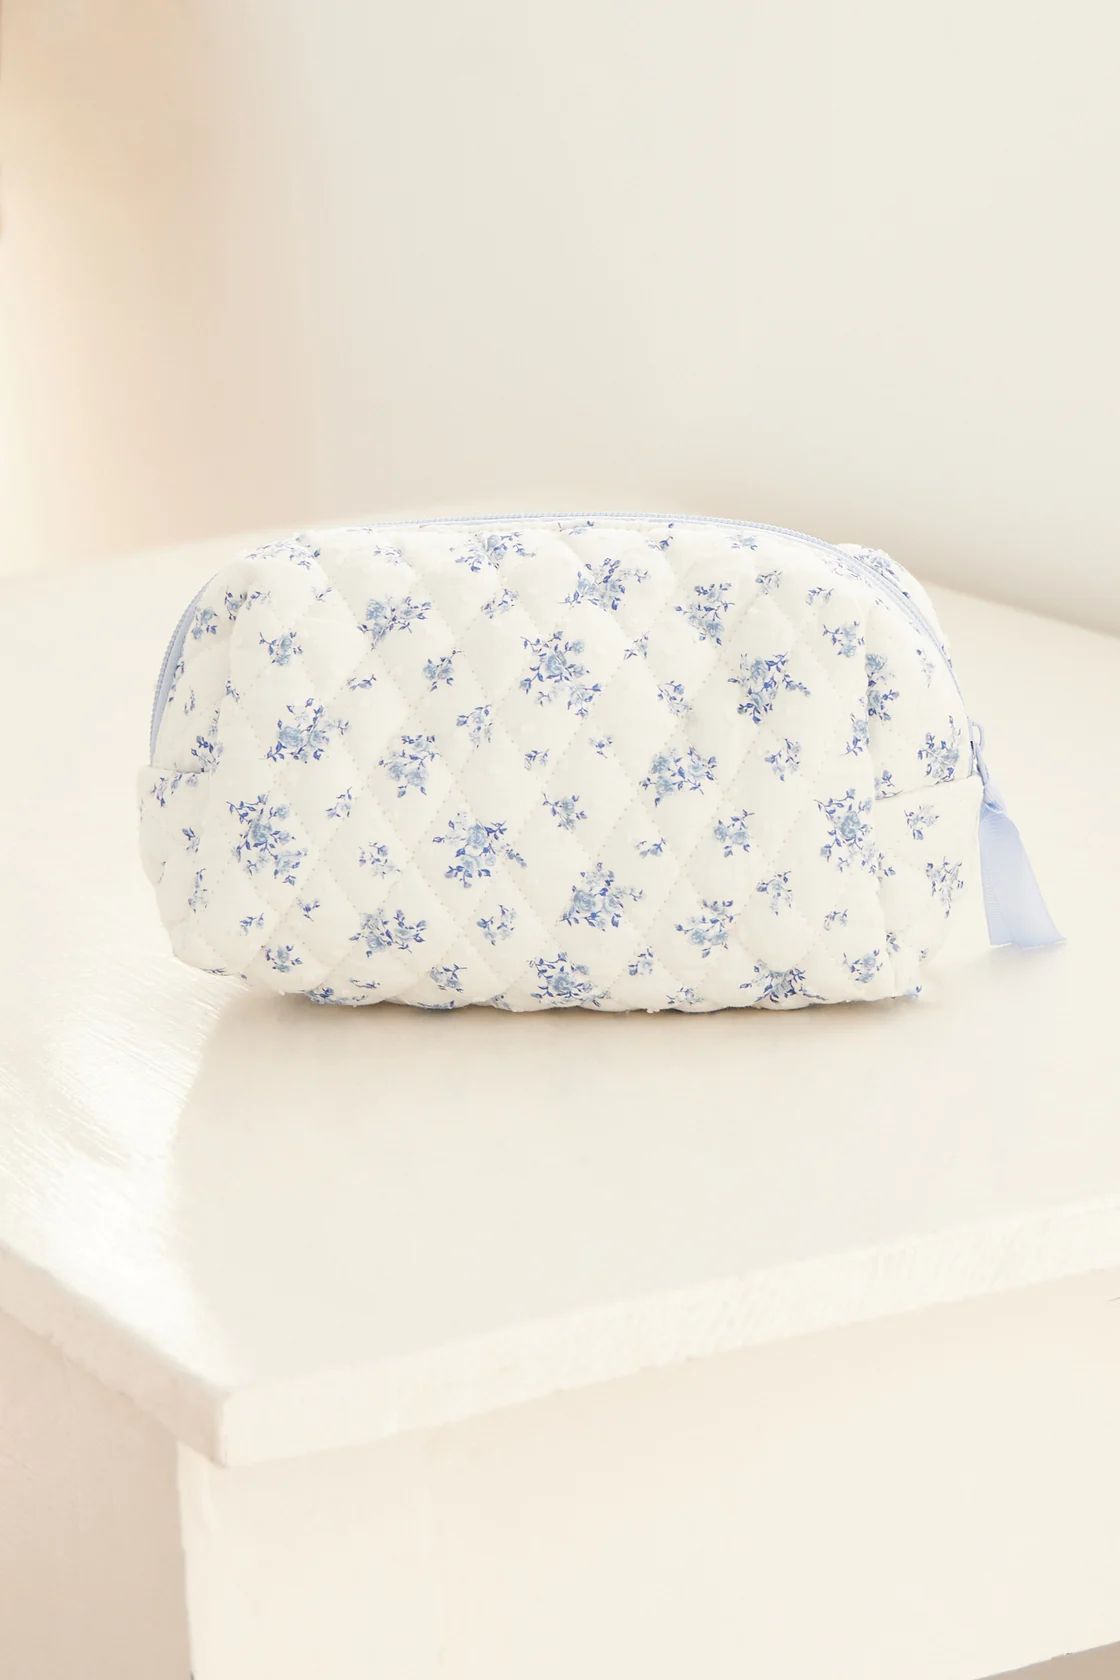 Floral Cosmetic Bag in Blue | Altar'd State | Altar'd State